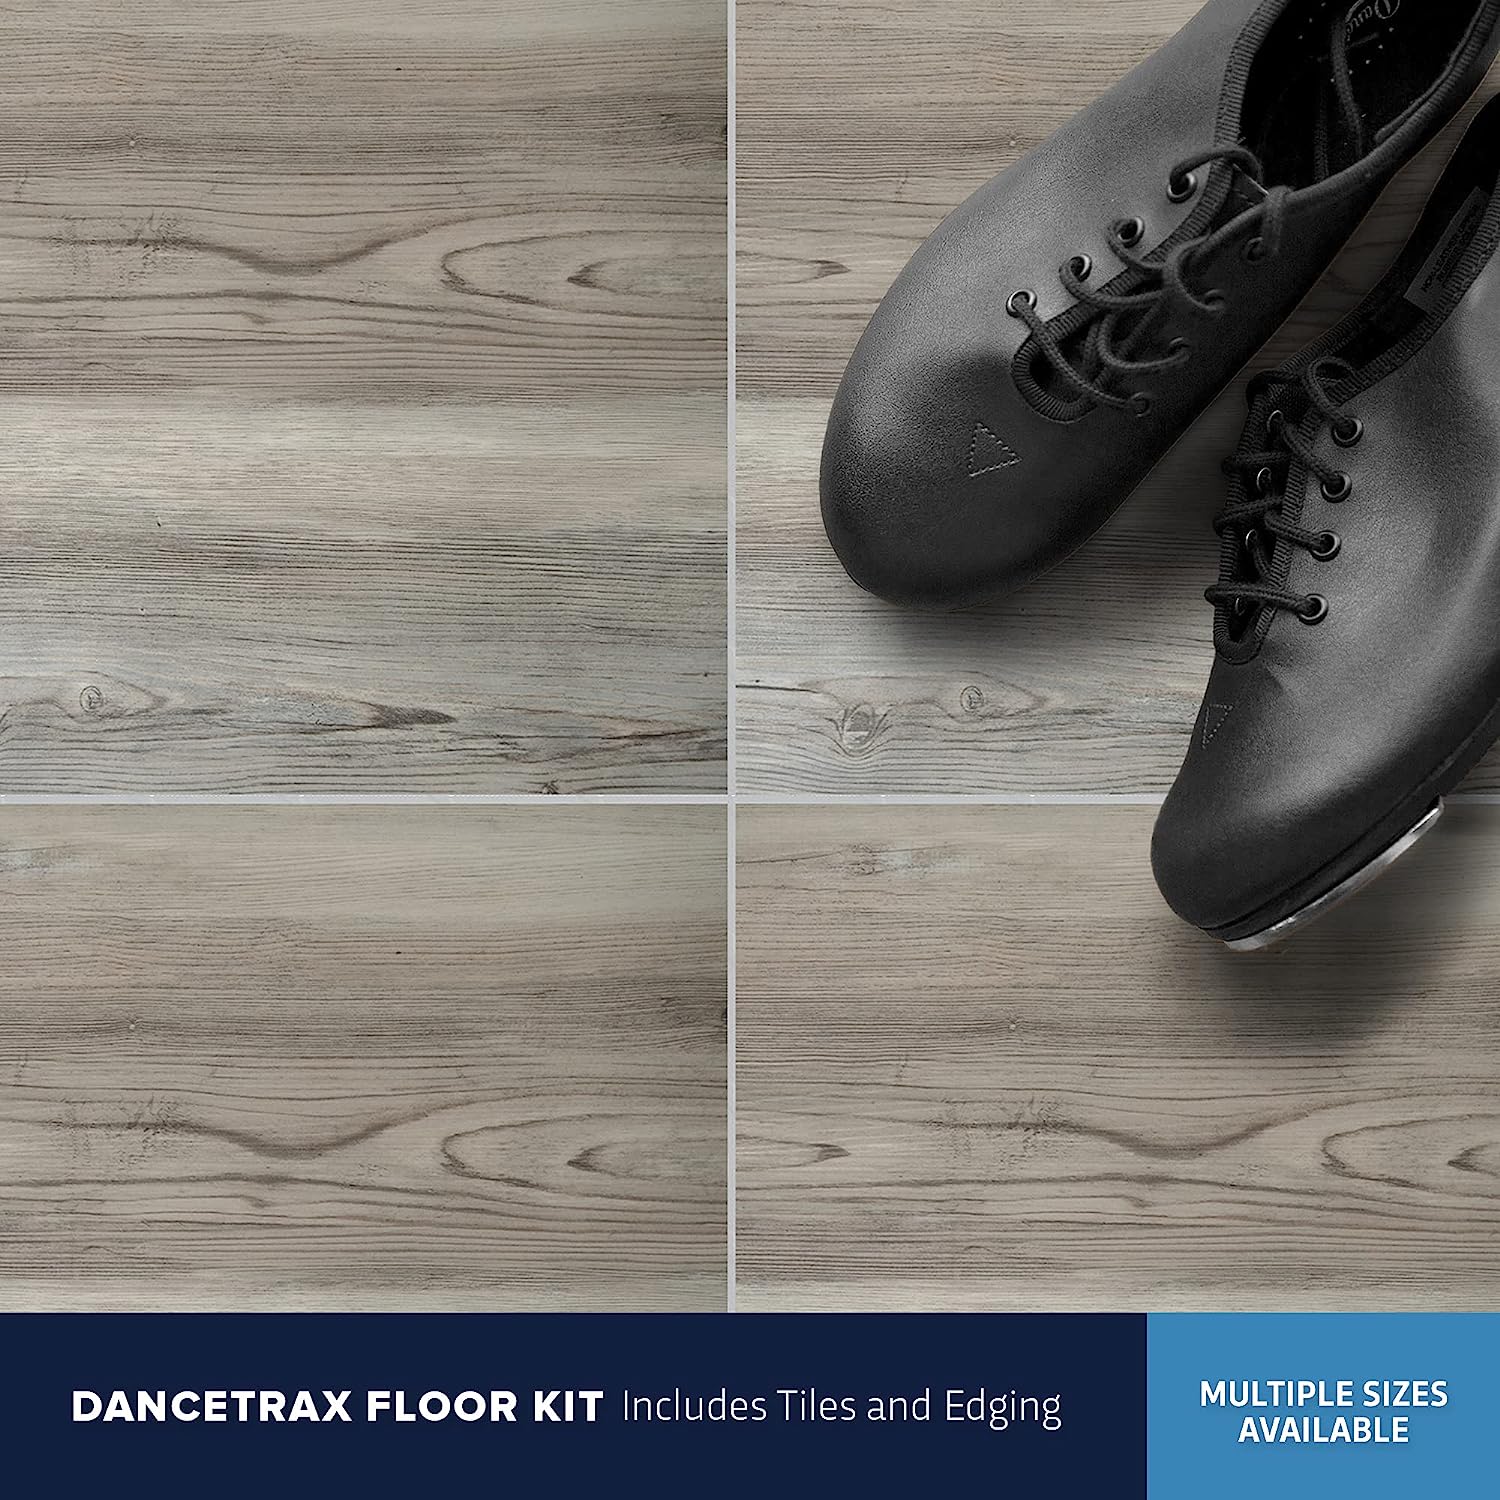 1/2 Inch Thick Dancetrax Practice Dance Floor Kits | Printed Plastic Dance Flooring for Practice and Performance of Countless Dance Styles | 12" x 12" Tiles